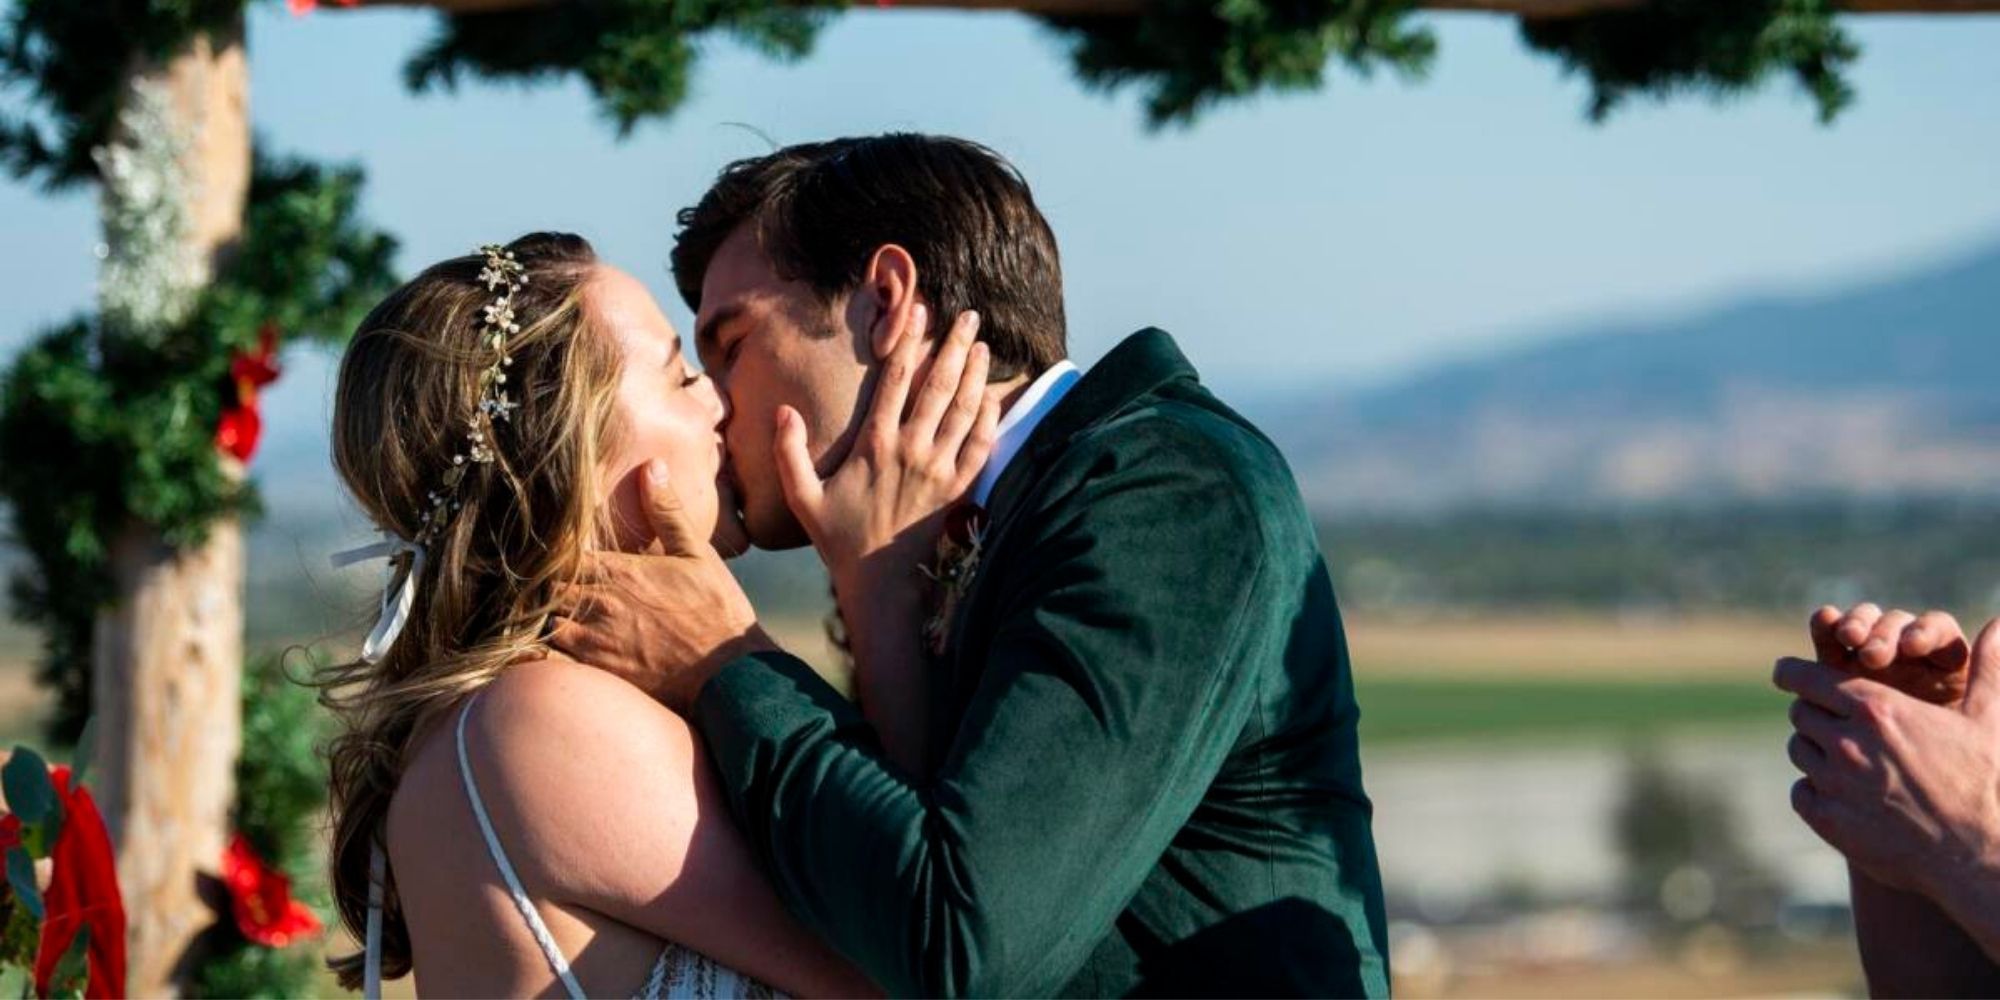 Callie and Joseph from A California Christmas kissing at their wedding